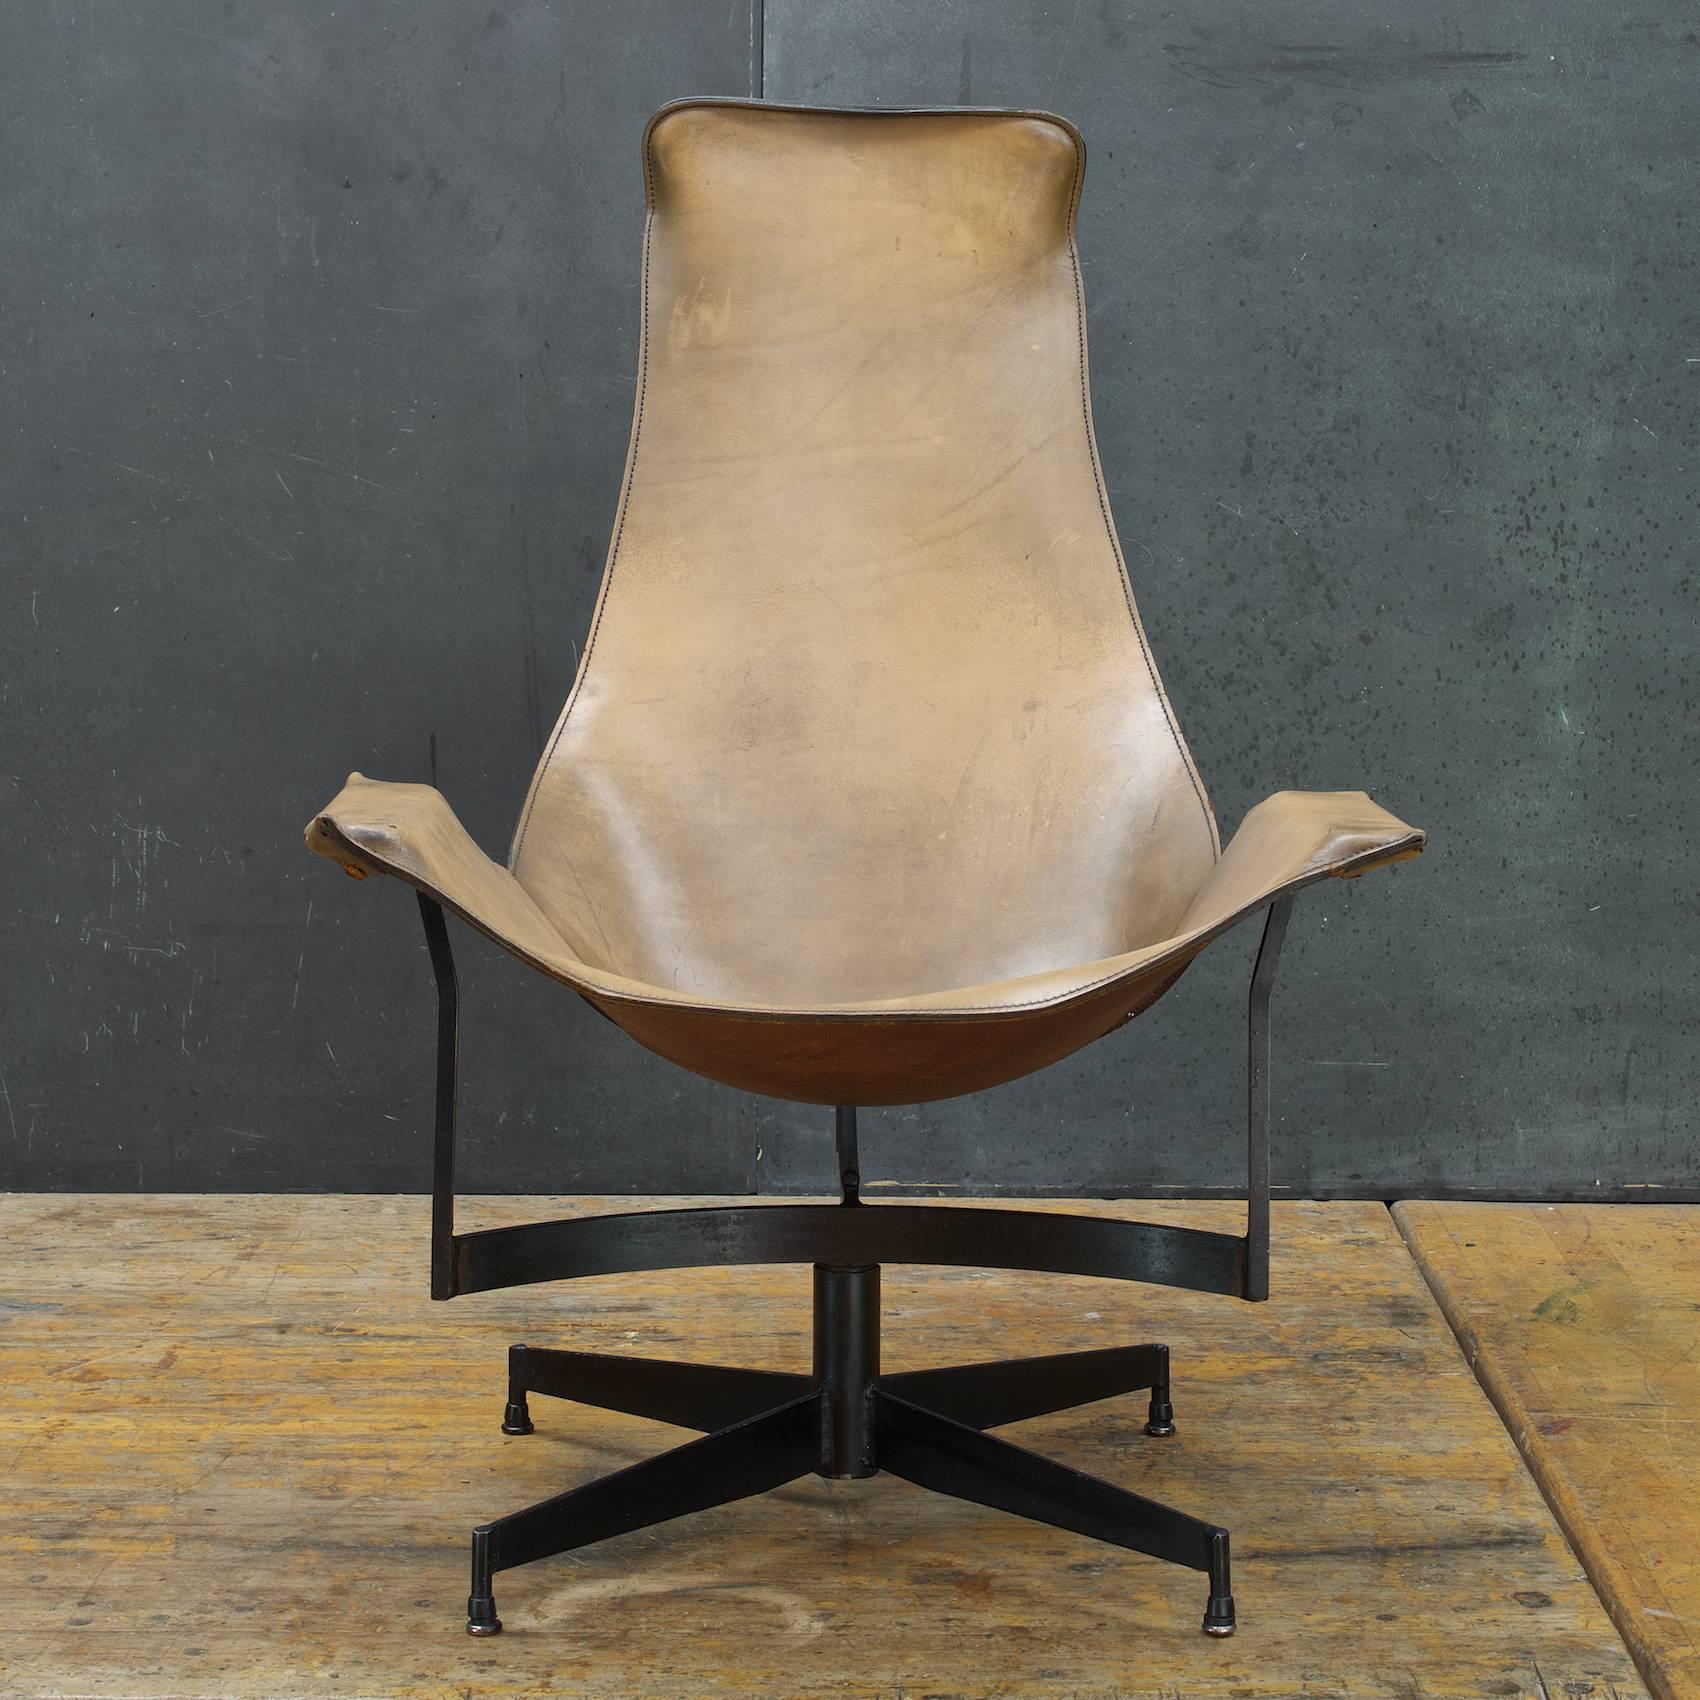 Attributed to Katavolos, A swivel leather sling lounge chair. Nice patina, heavily worn leather but useable and strong, no rips, no tears.